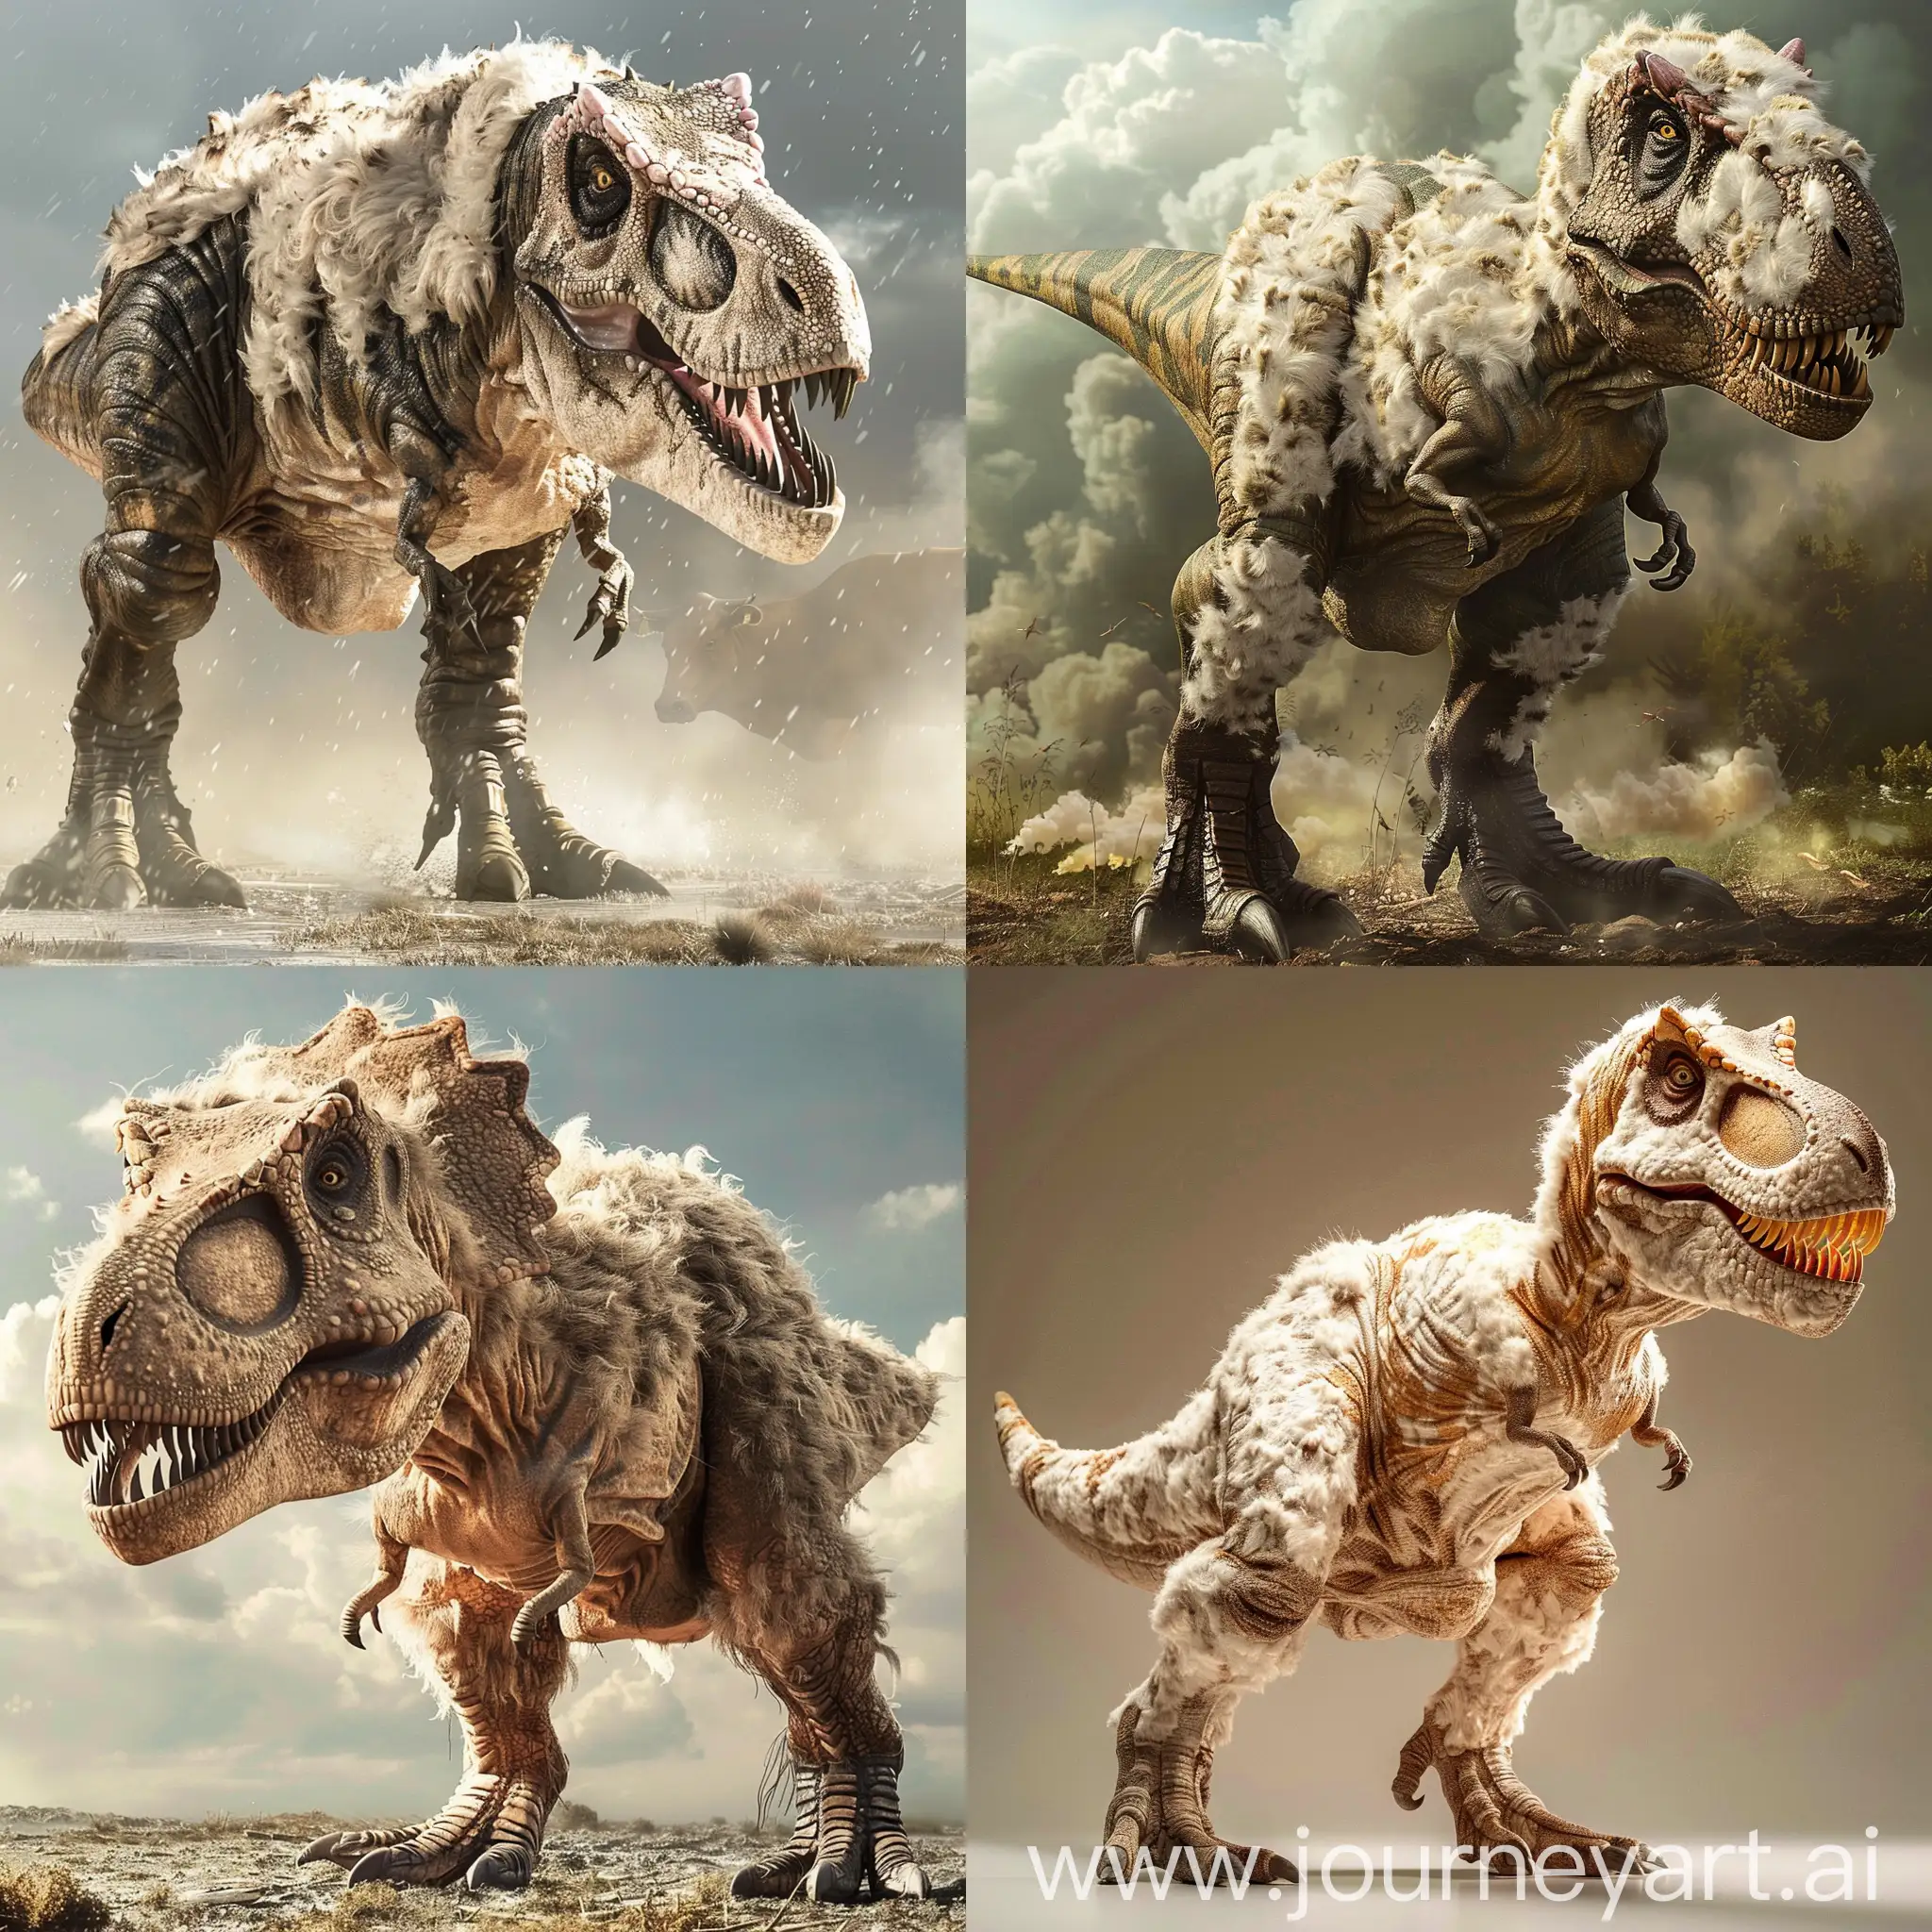 a t-rex covered by fur and its skin is like a cow